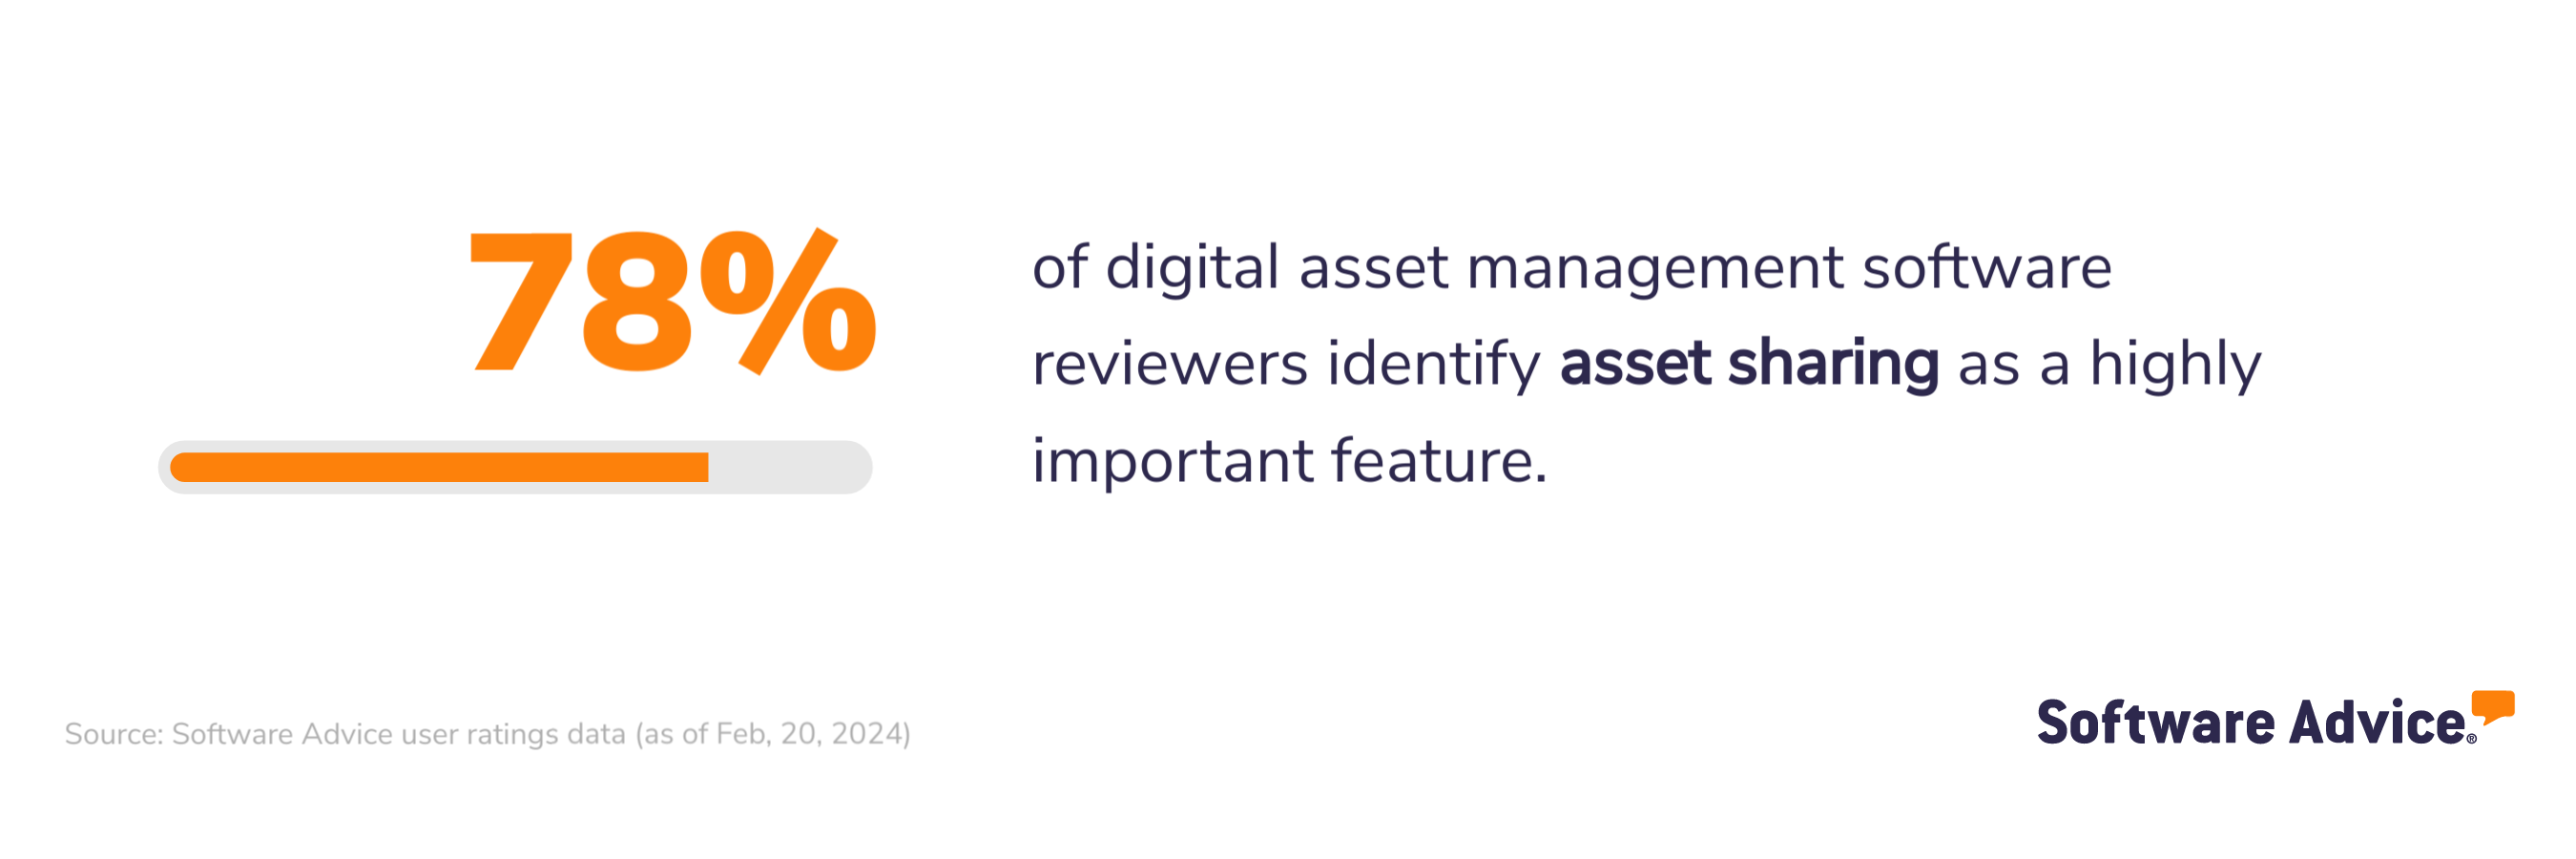 78% of digital asset management software reviewers identify asset sharing as a highly important feature.